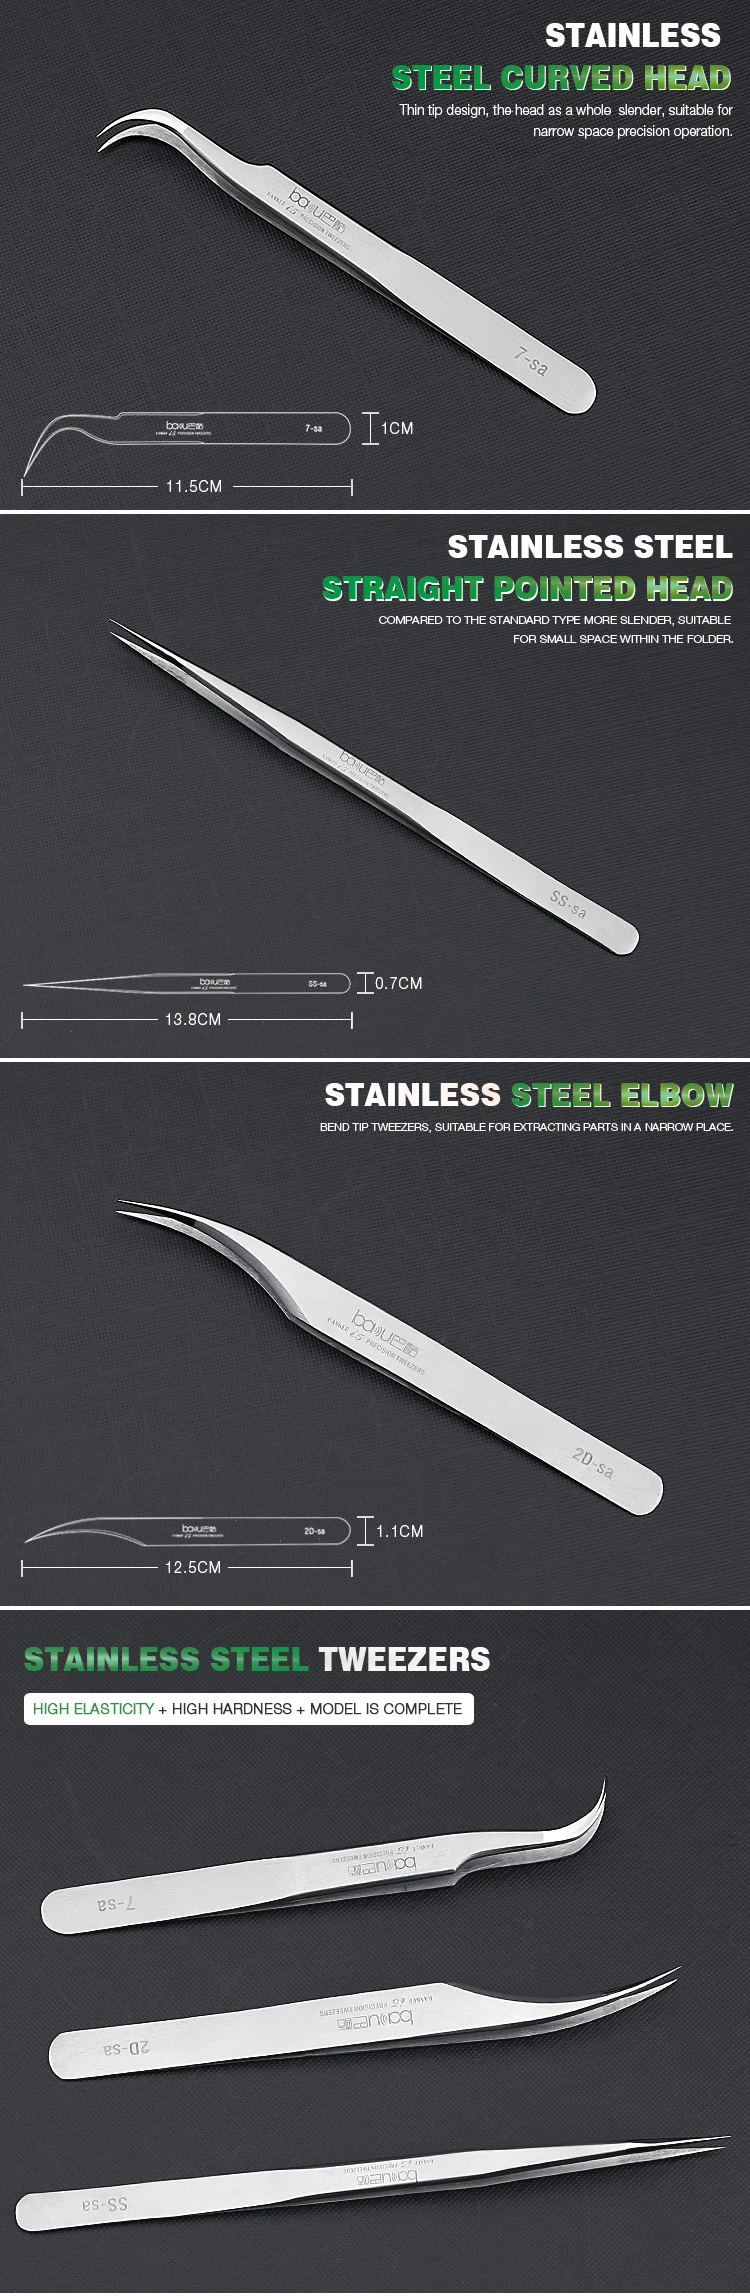 BAKU BK-i5 High-quality Precision Stainless Steel Grainy Polished Medical ESD Tweezers For Mobile phone circuit board